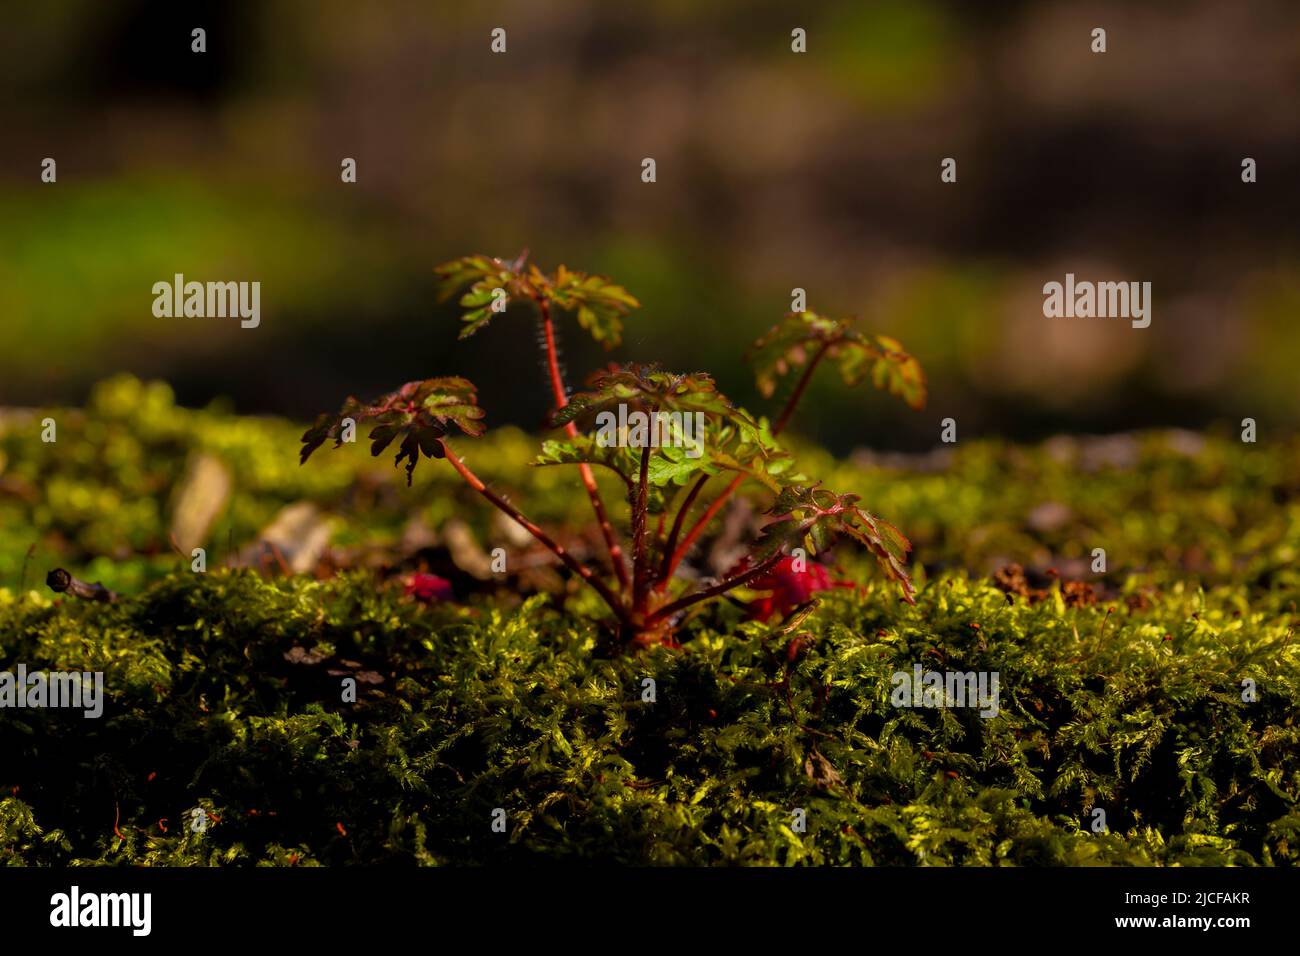 Small young wild plant grows on moss in spring, Macro Photography Stock Photo